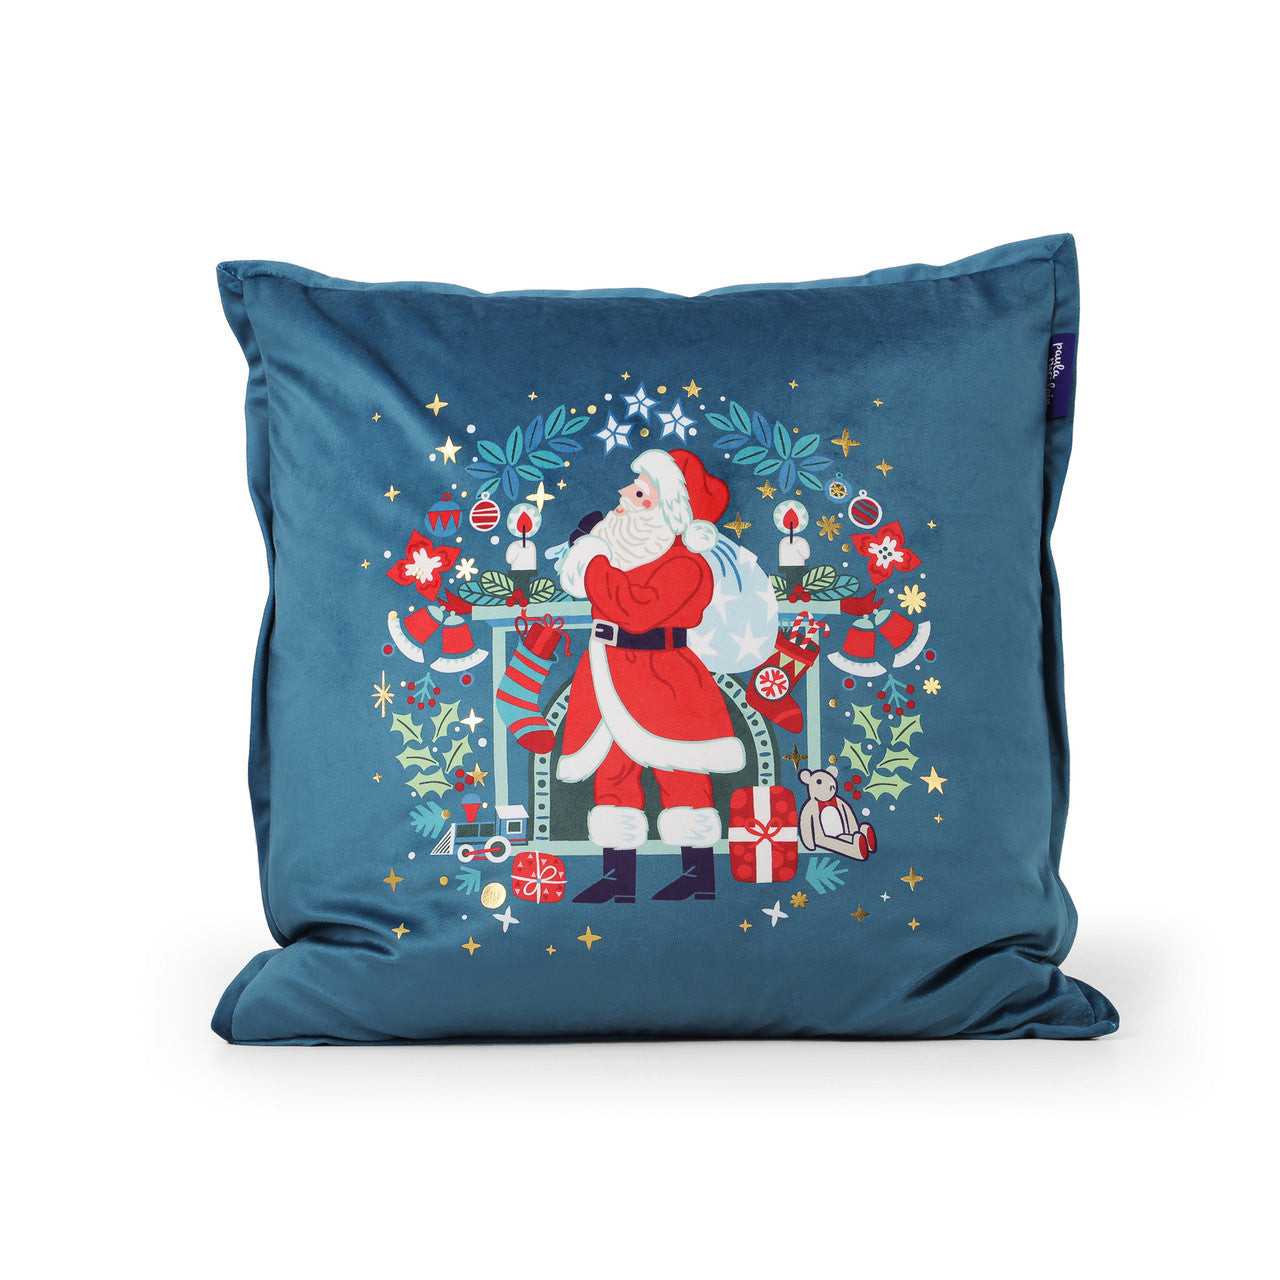 Christmas Cushion - Santa with Sack - NEW 2022  Gather your loved ones for a holiday celebration to remember. We just Love Christmas! The festive season, the giving of gifts, creating memories and being together with family and loved ones. Have lots of fun with our lovingly designed and created Christmas decorations, each one has a magic sparkle of elf dust!